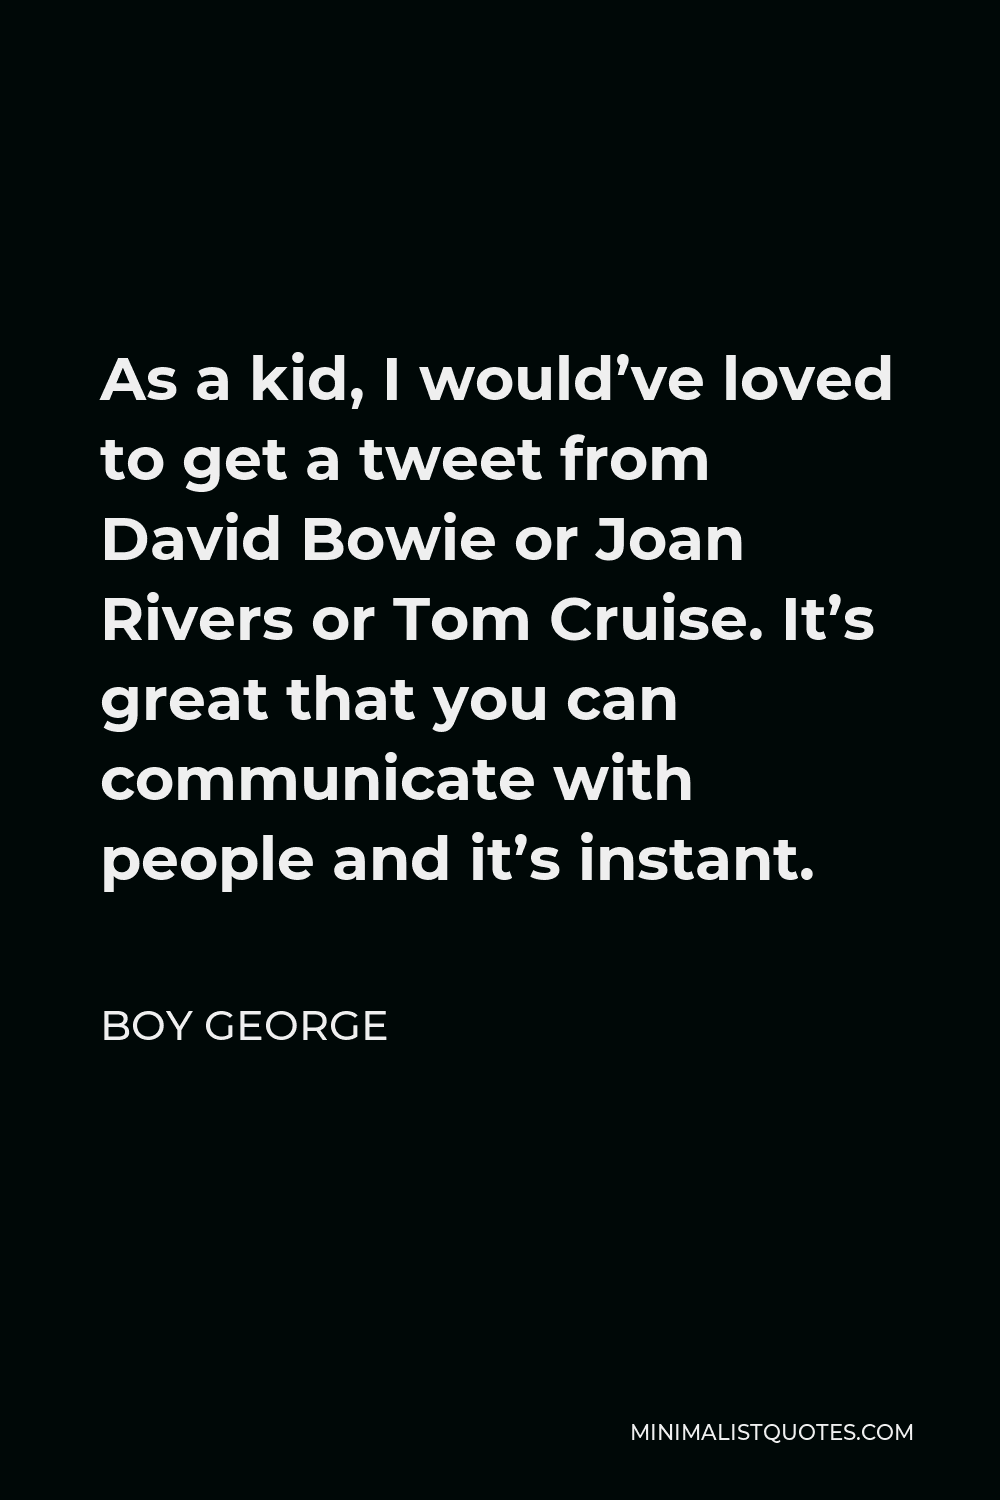 Boy George Quote - As a kid, I would’ve loved to get a tweet from David Bowie or Joan Rivers or Tom Cruise. It’s great that you can communicate with people and it’s instant.